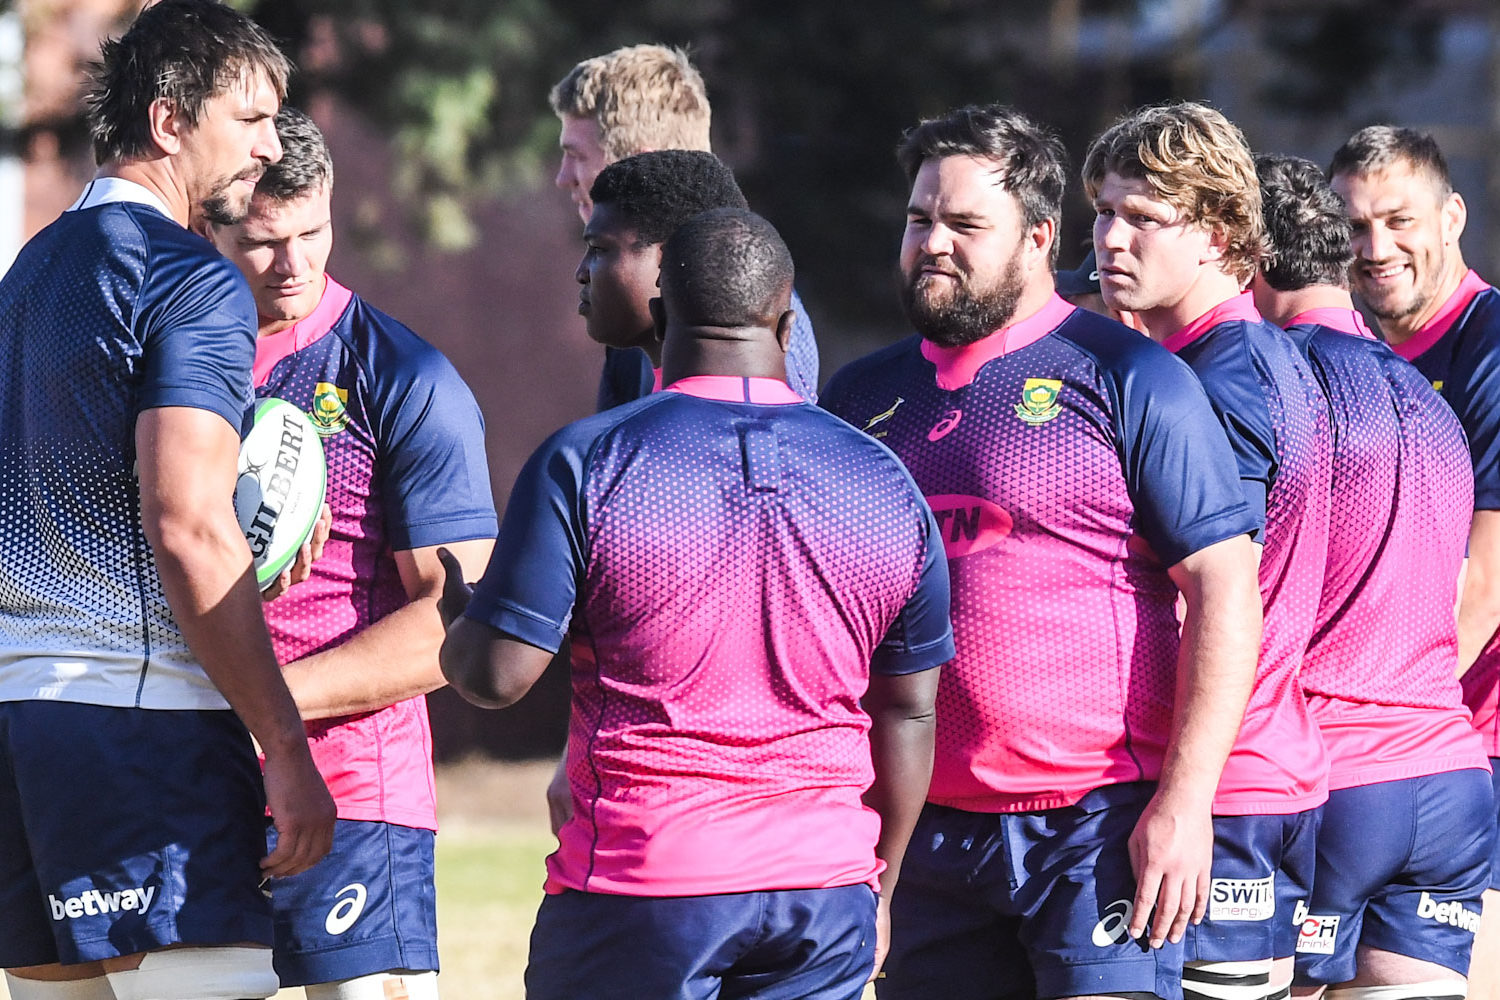 PRETORIA, SOUTH AFRICA - JUNE 21: Springbok players during the South African men's national rugby team training session at Loftus Versfeld, B Field on June 21, 2022 in Pretoria, South Africa. (Photo by Sydney Seshibedi/Gallo Images)